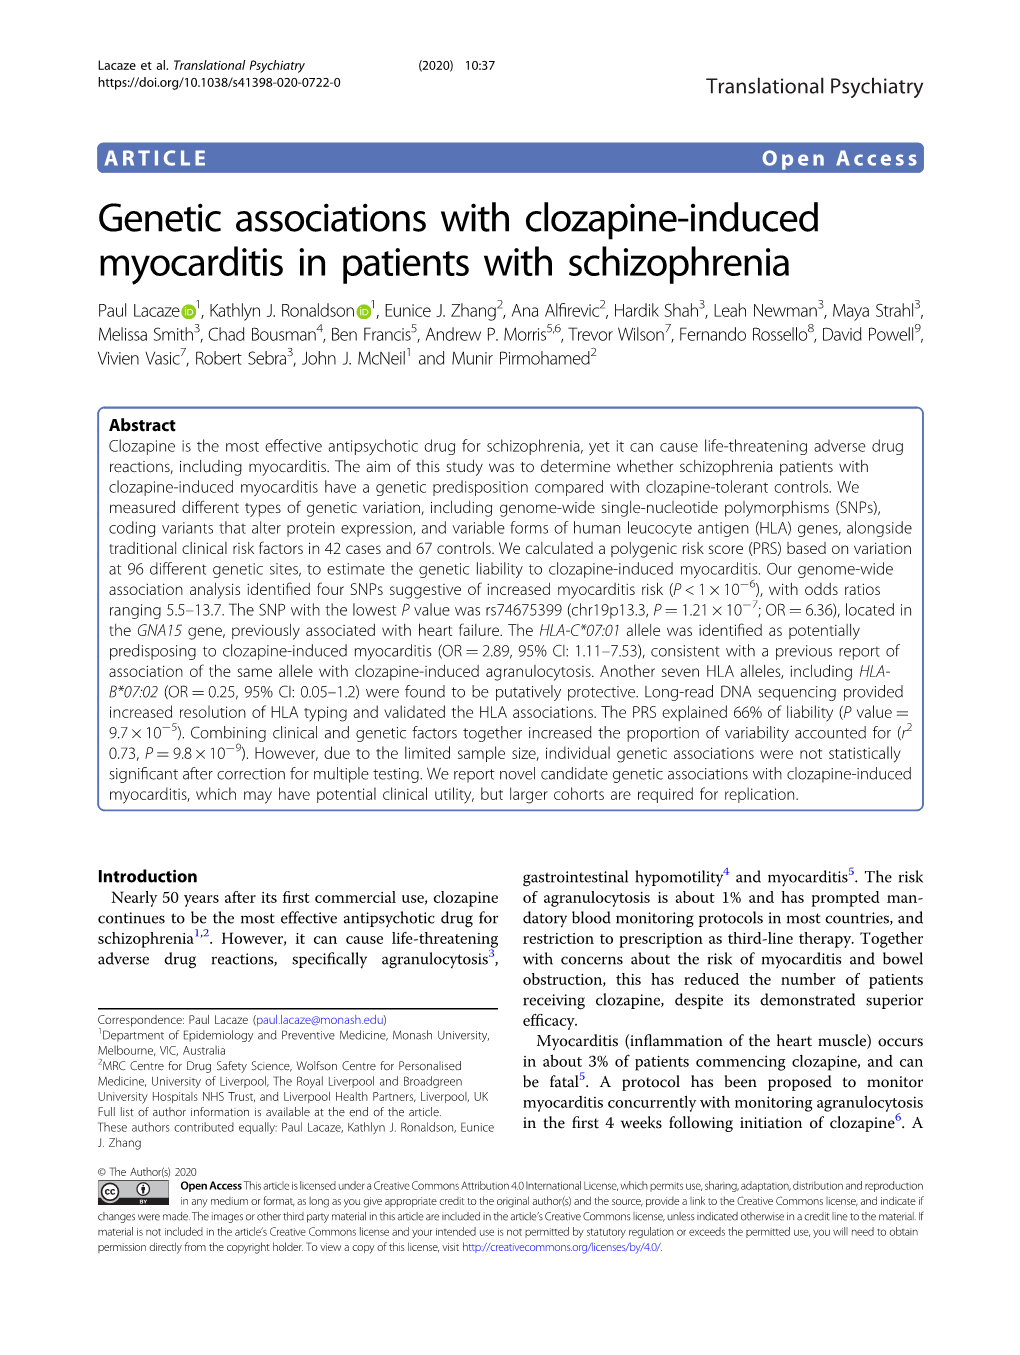 Genetic Associations with Clozapine-Induced Myocarditis in Patients with Schizophrenia Paul Lacaze 1, Kathlyn J